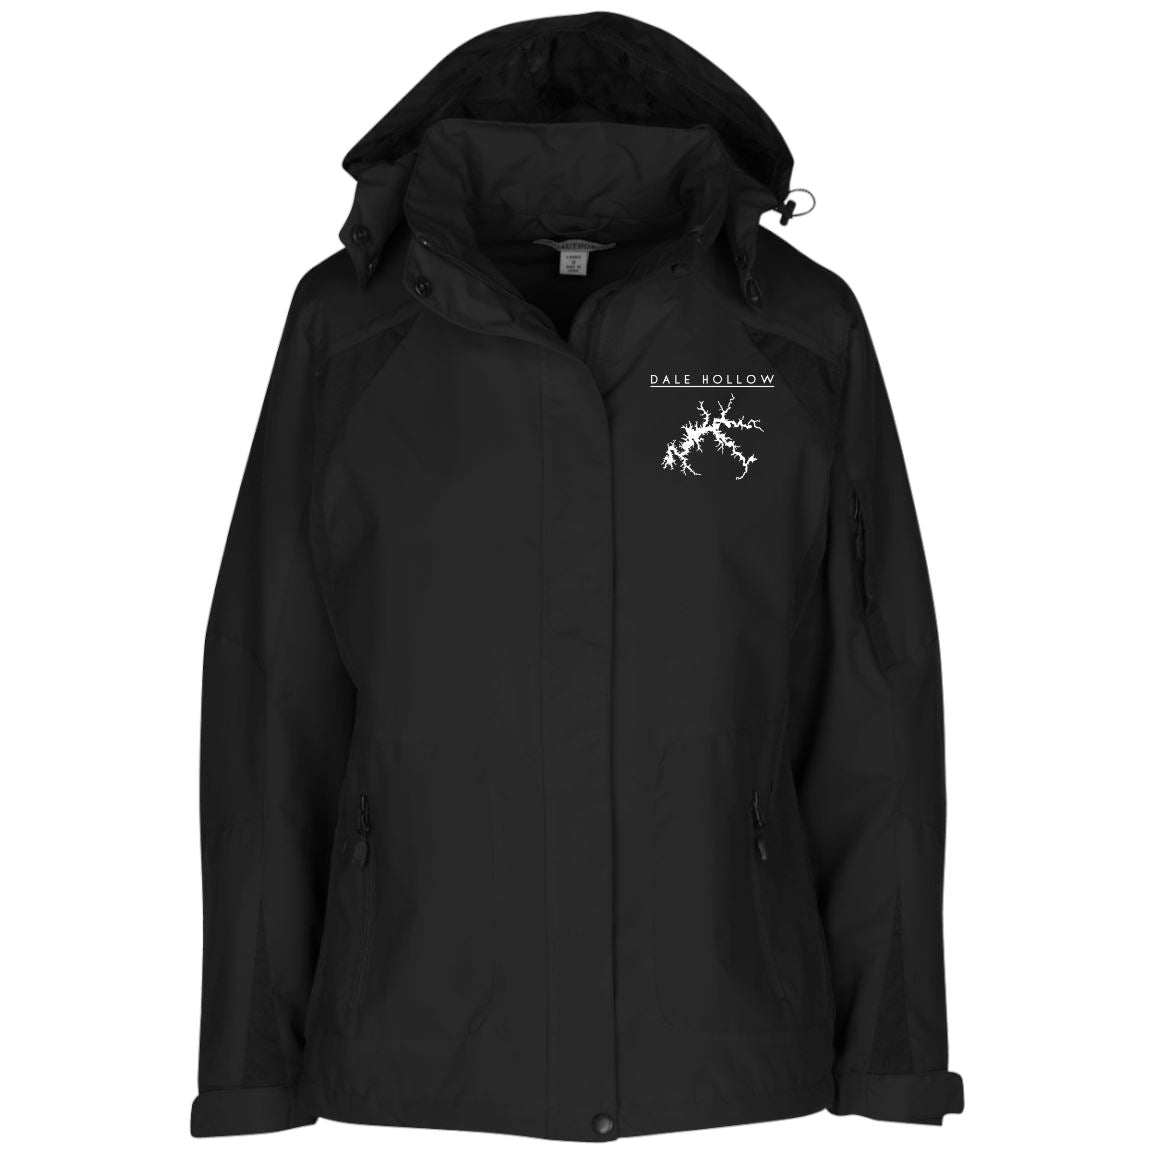 Dale Hollow Embroidered Port Authority All-Season Women's Jacket - Houseboat Kings